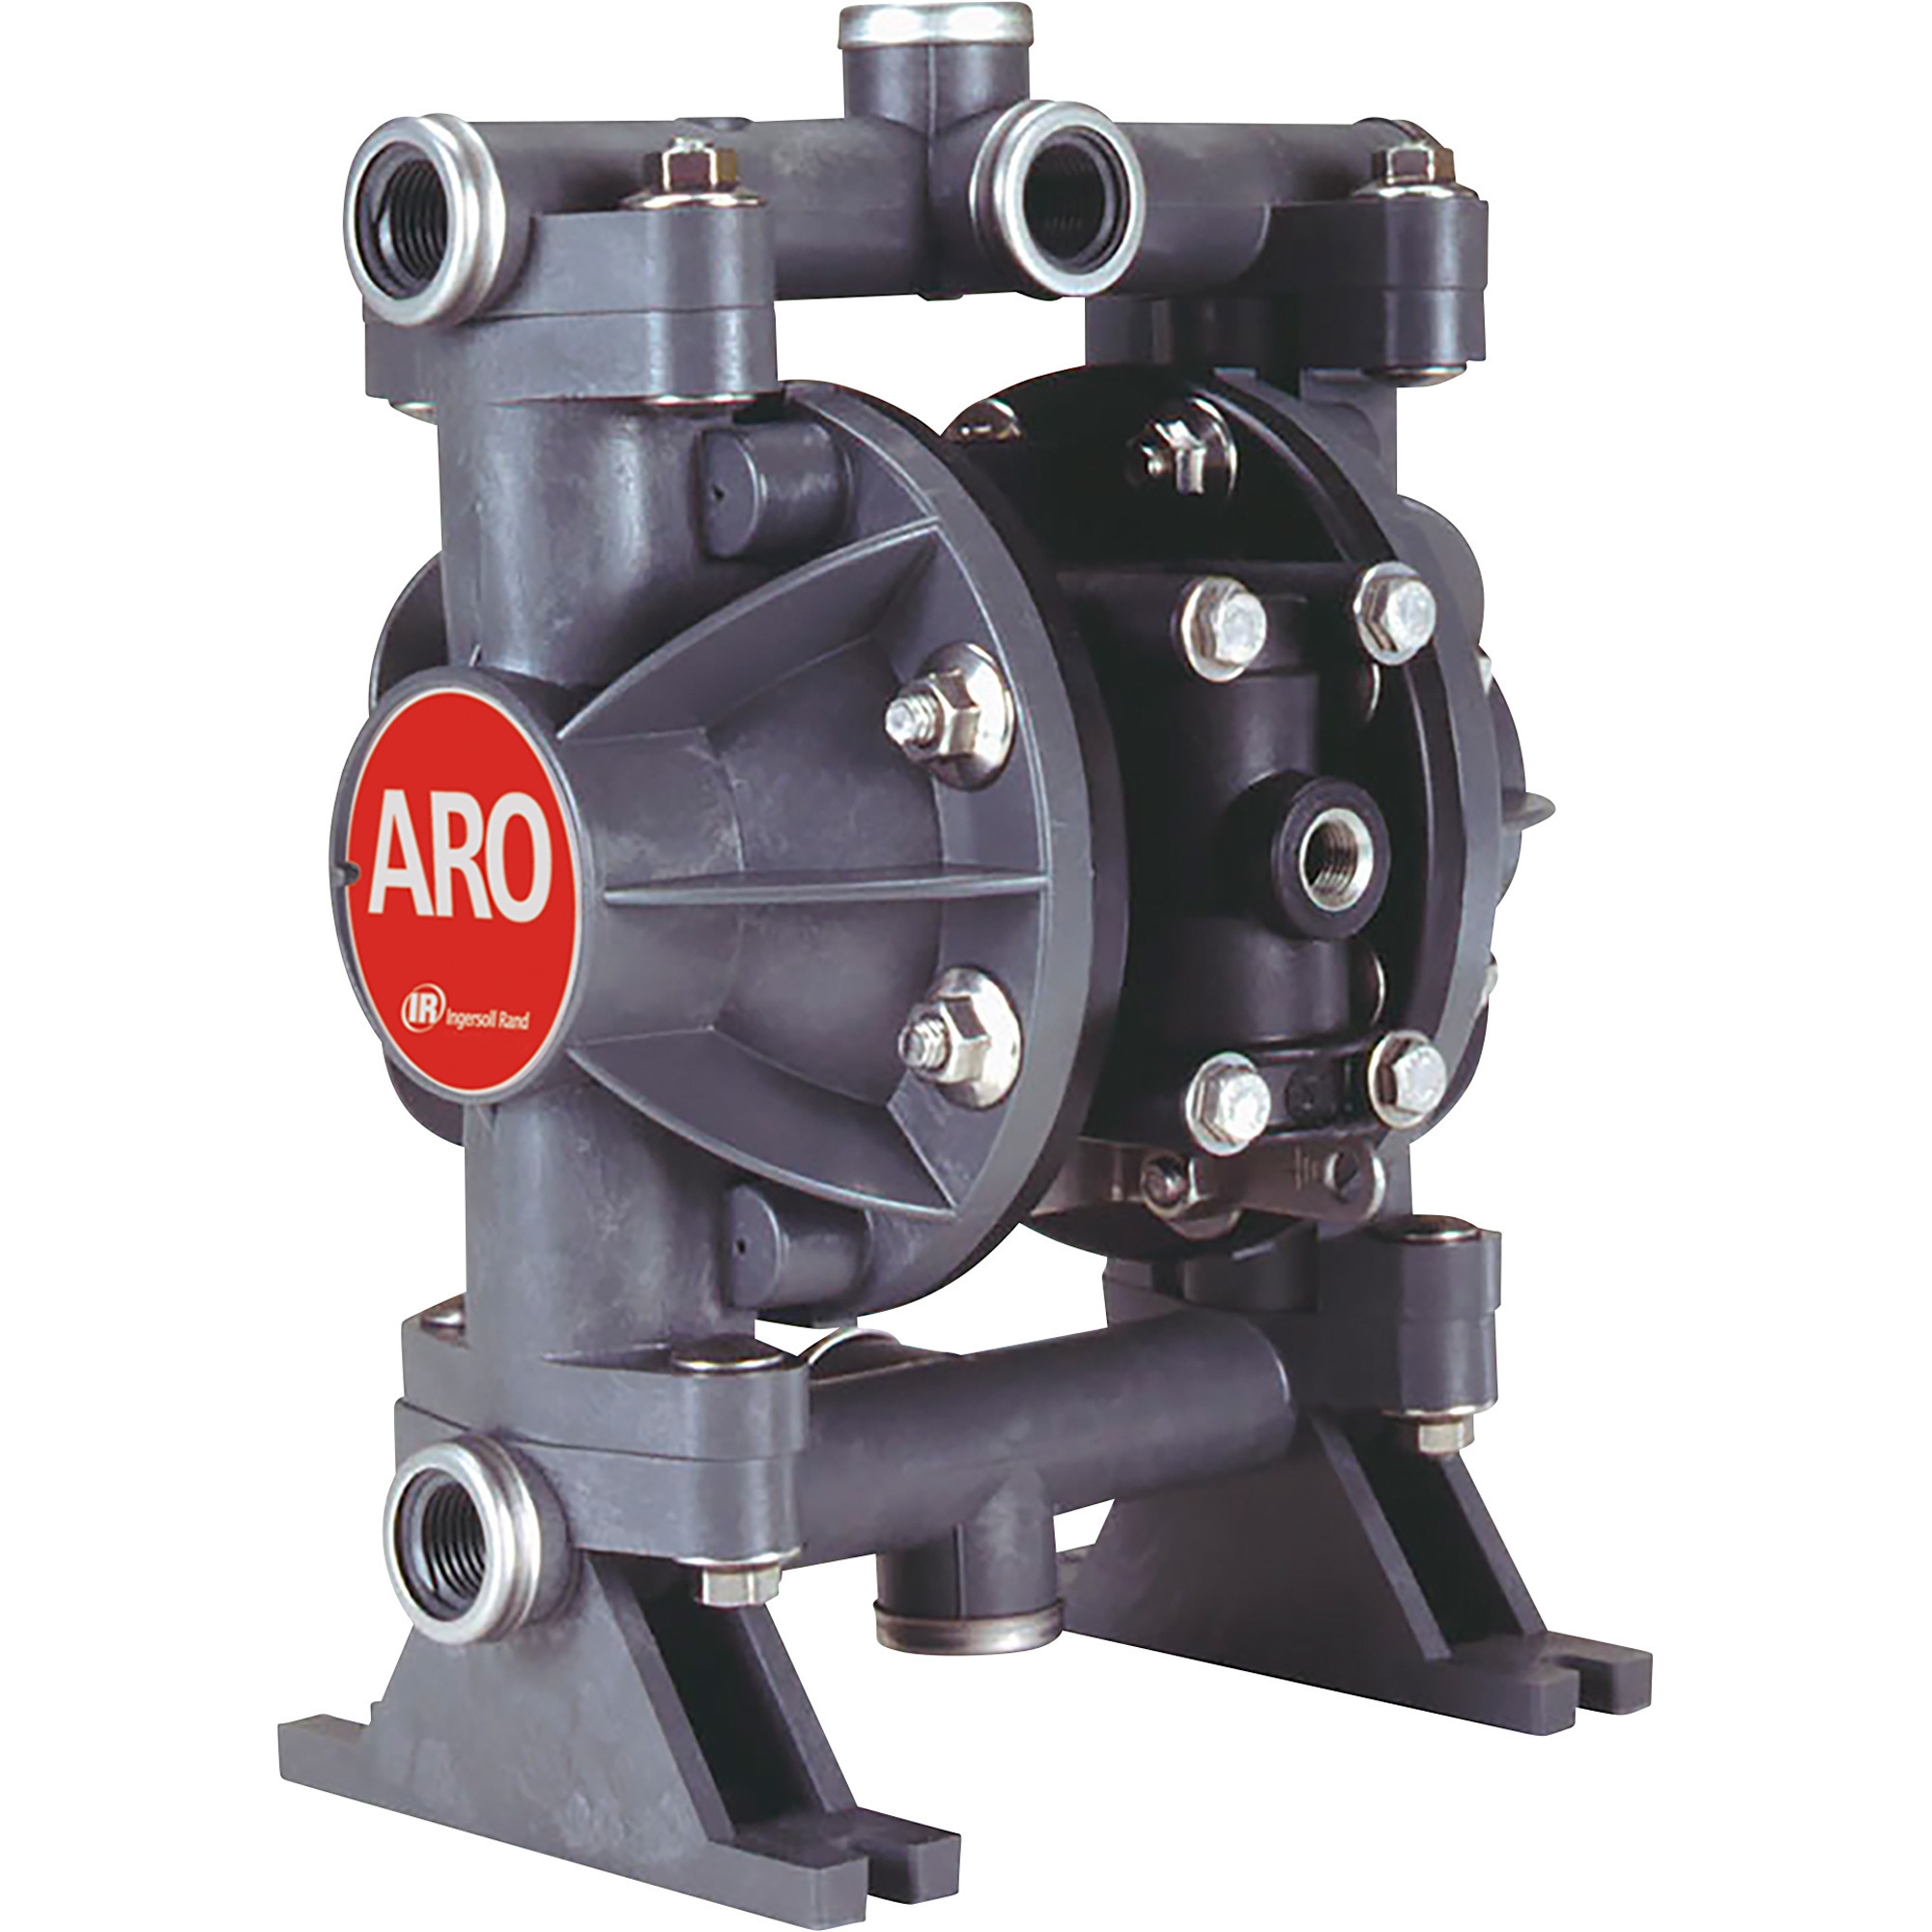 ARO Air-Operated Double Diaphragm Pump, 1/2Inch Ports, 13 GPM, Groundable Acetal/Nitrile, Model 666056-622